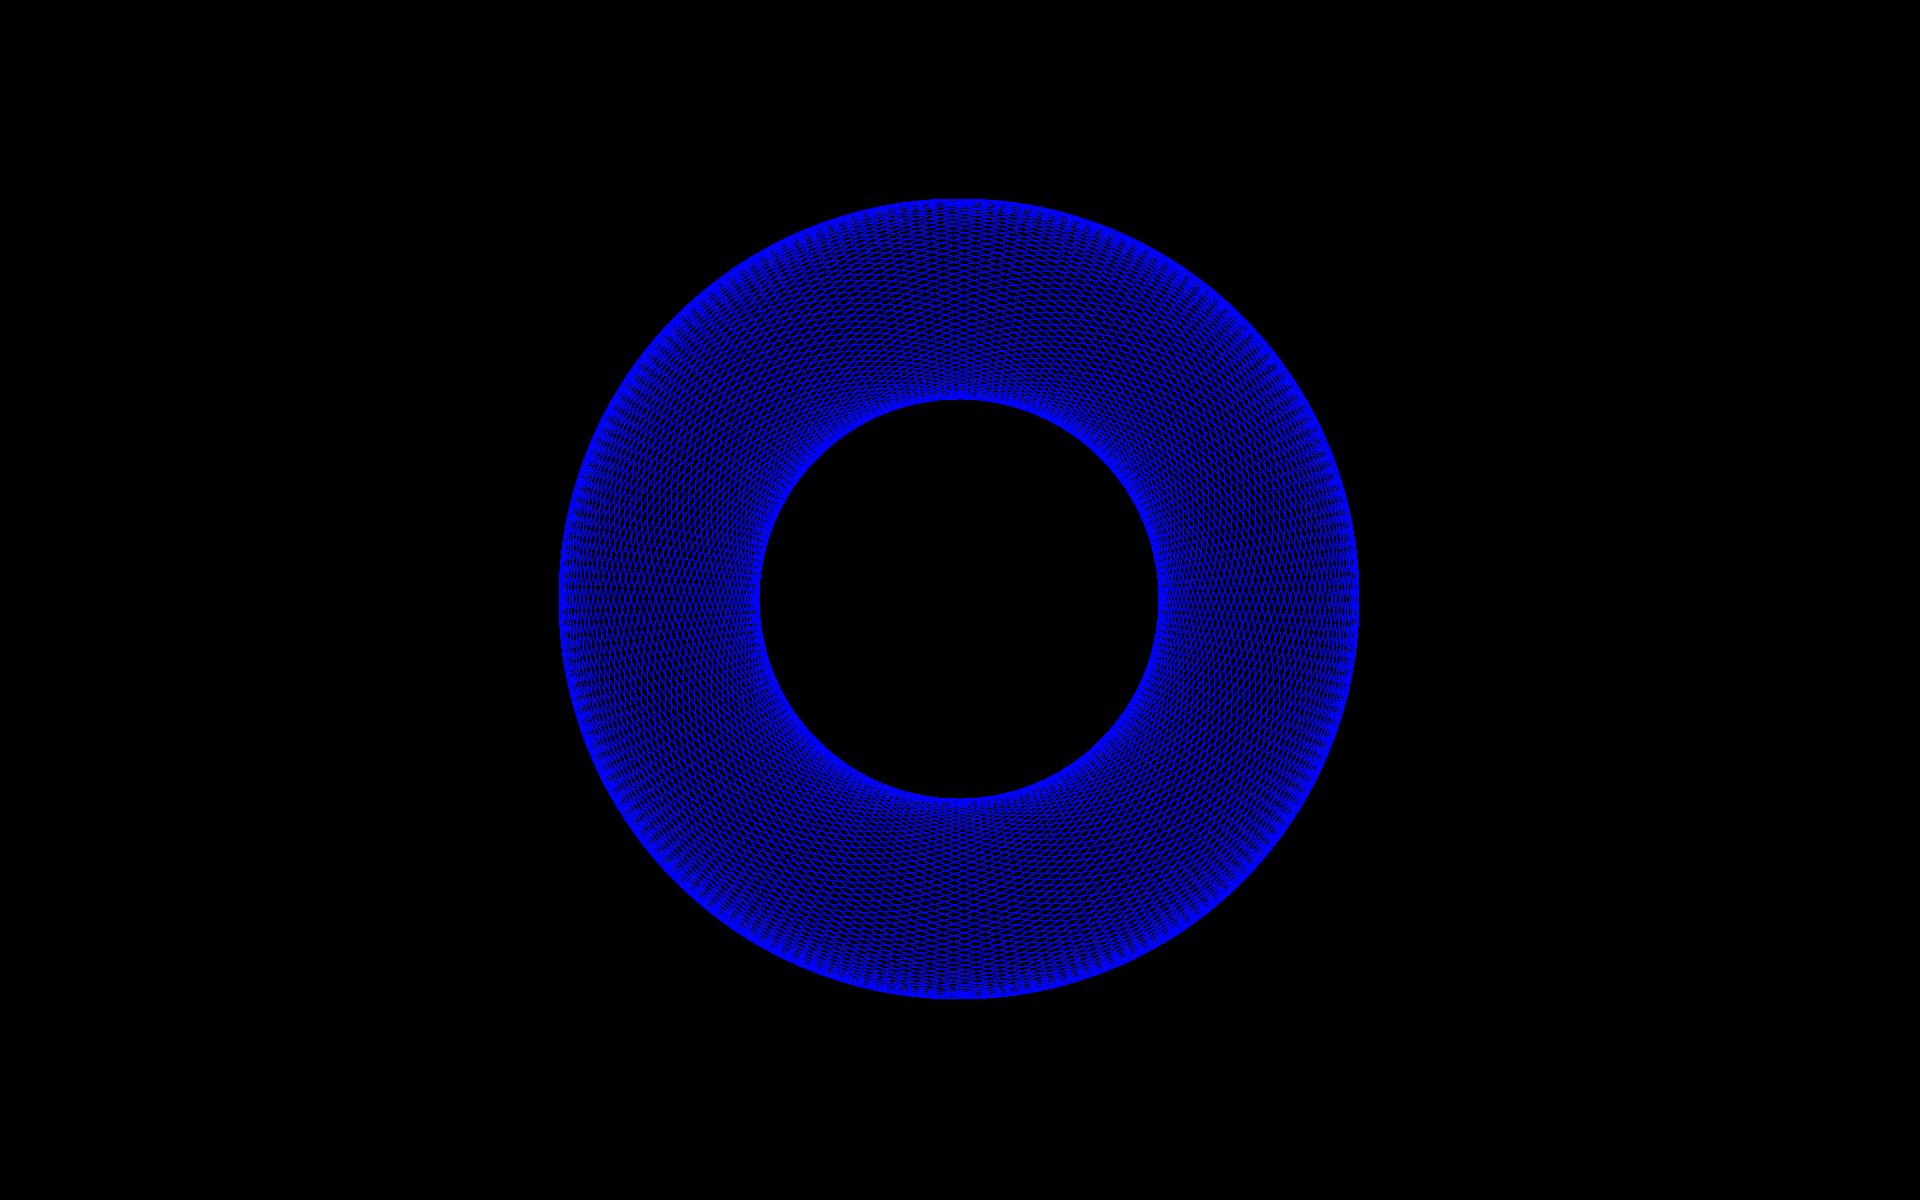 File:Torus with cross-hatched wireframe.gif